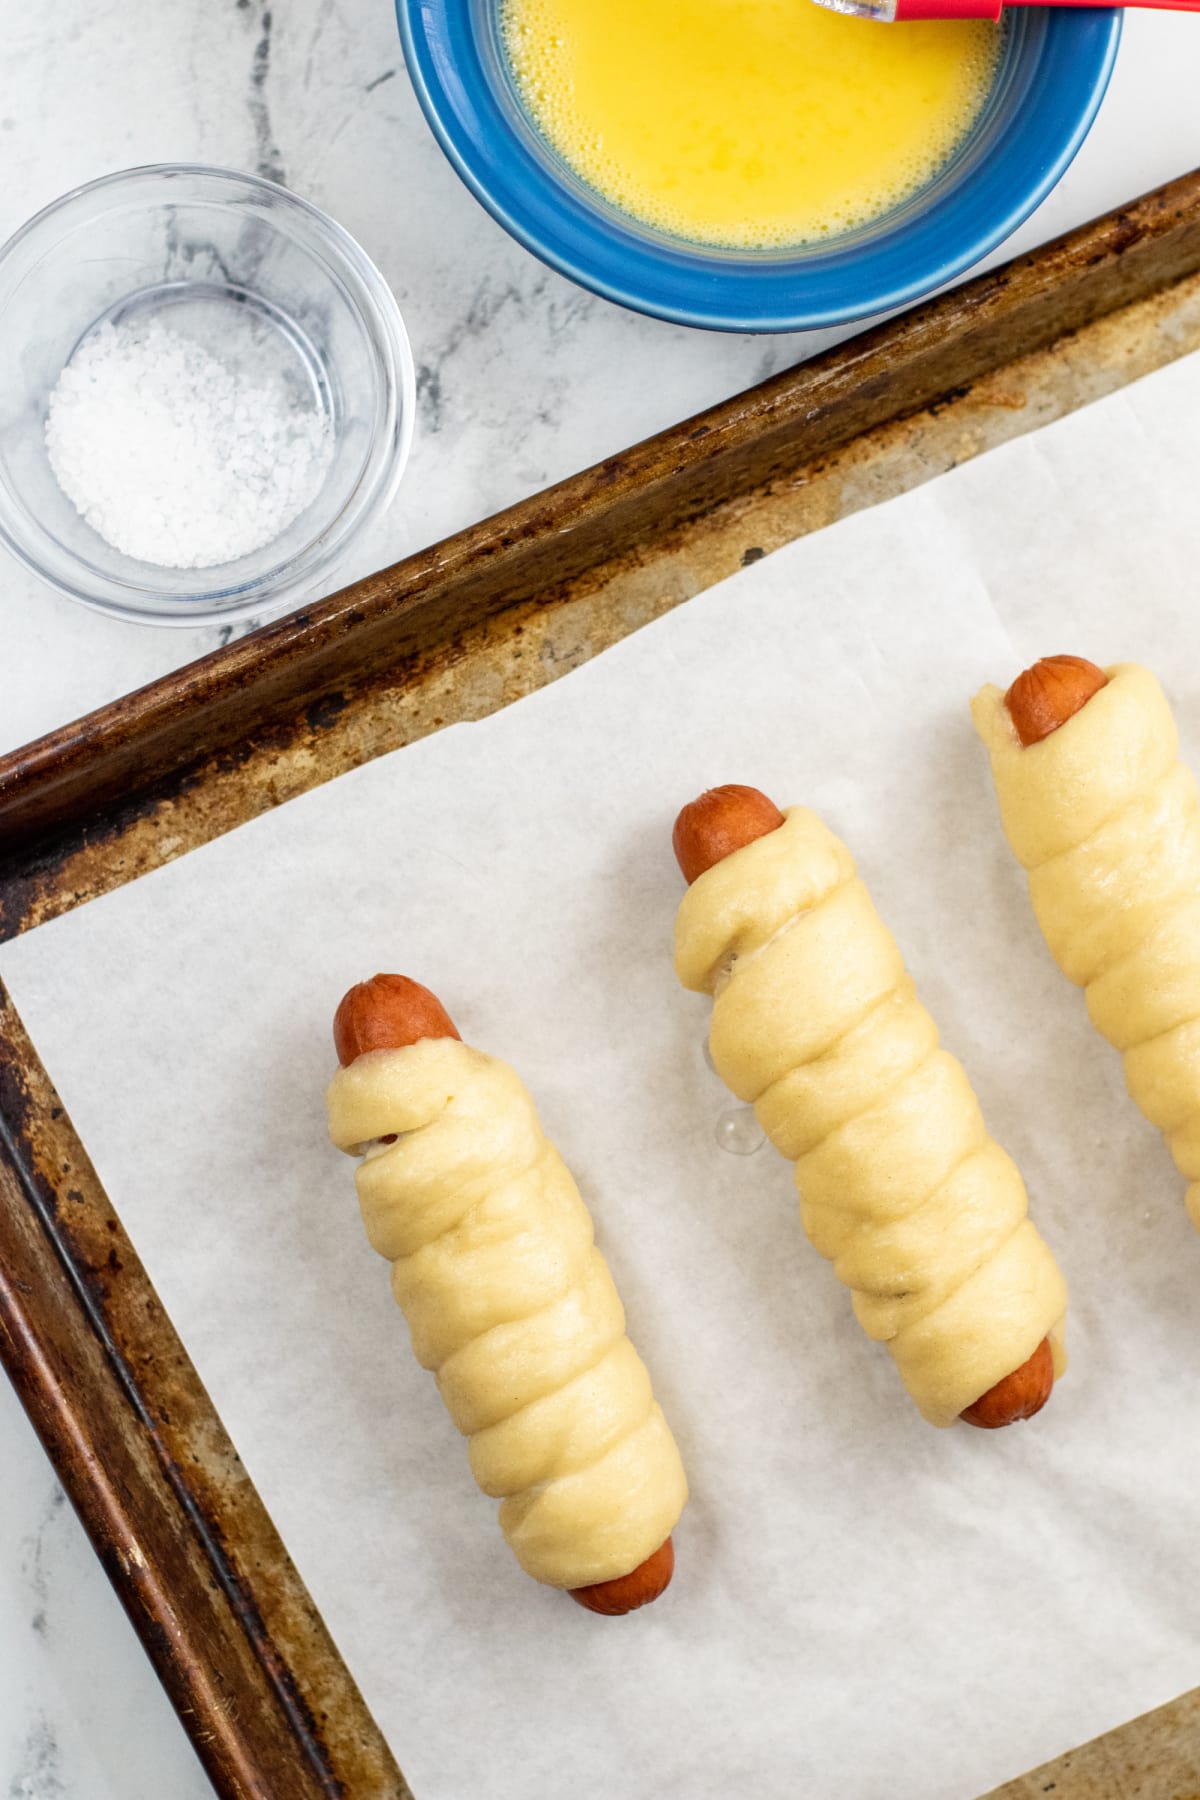 Hot dogs wrapped in pretzel dough